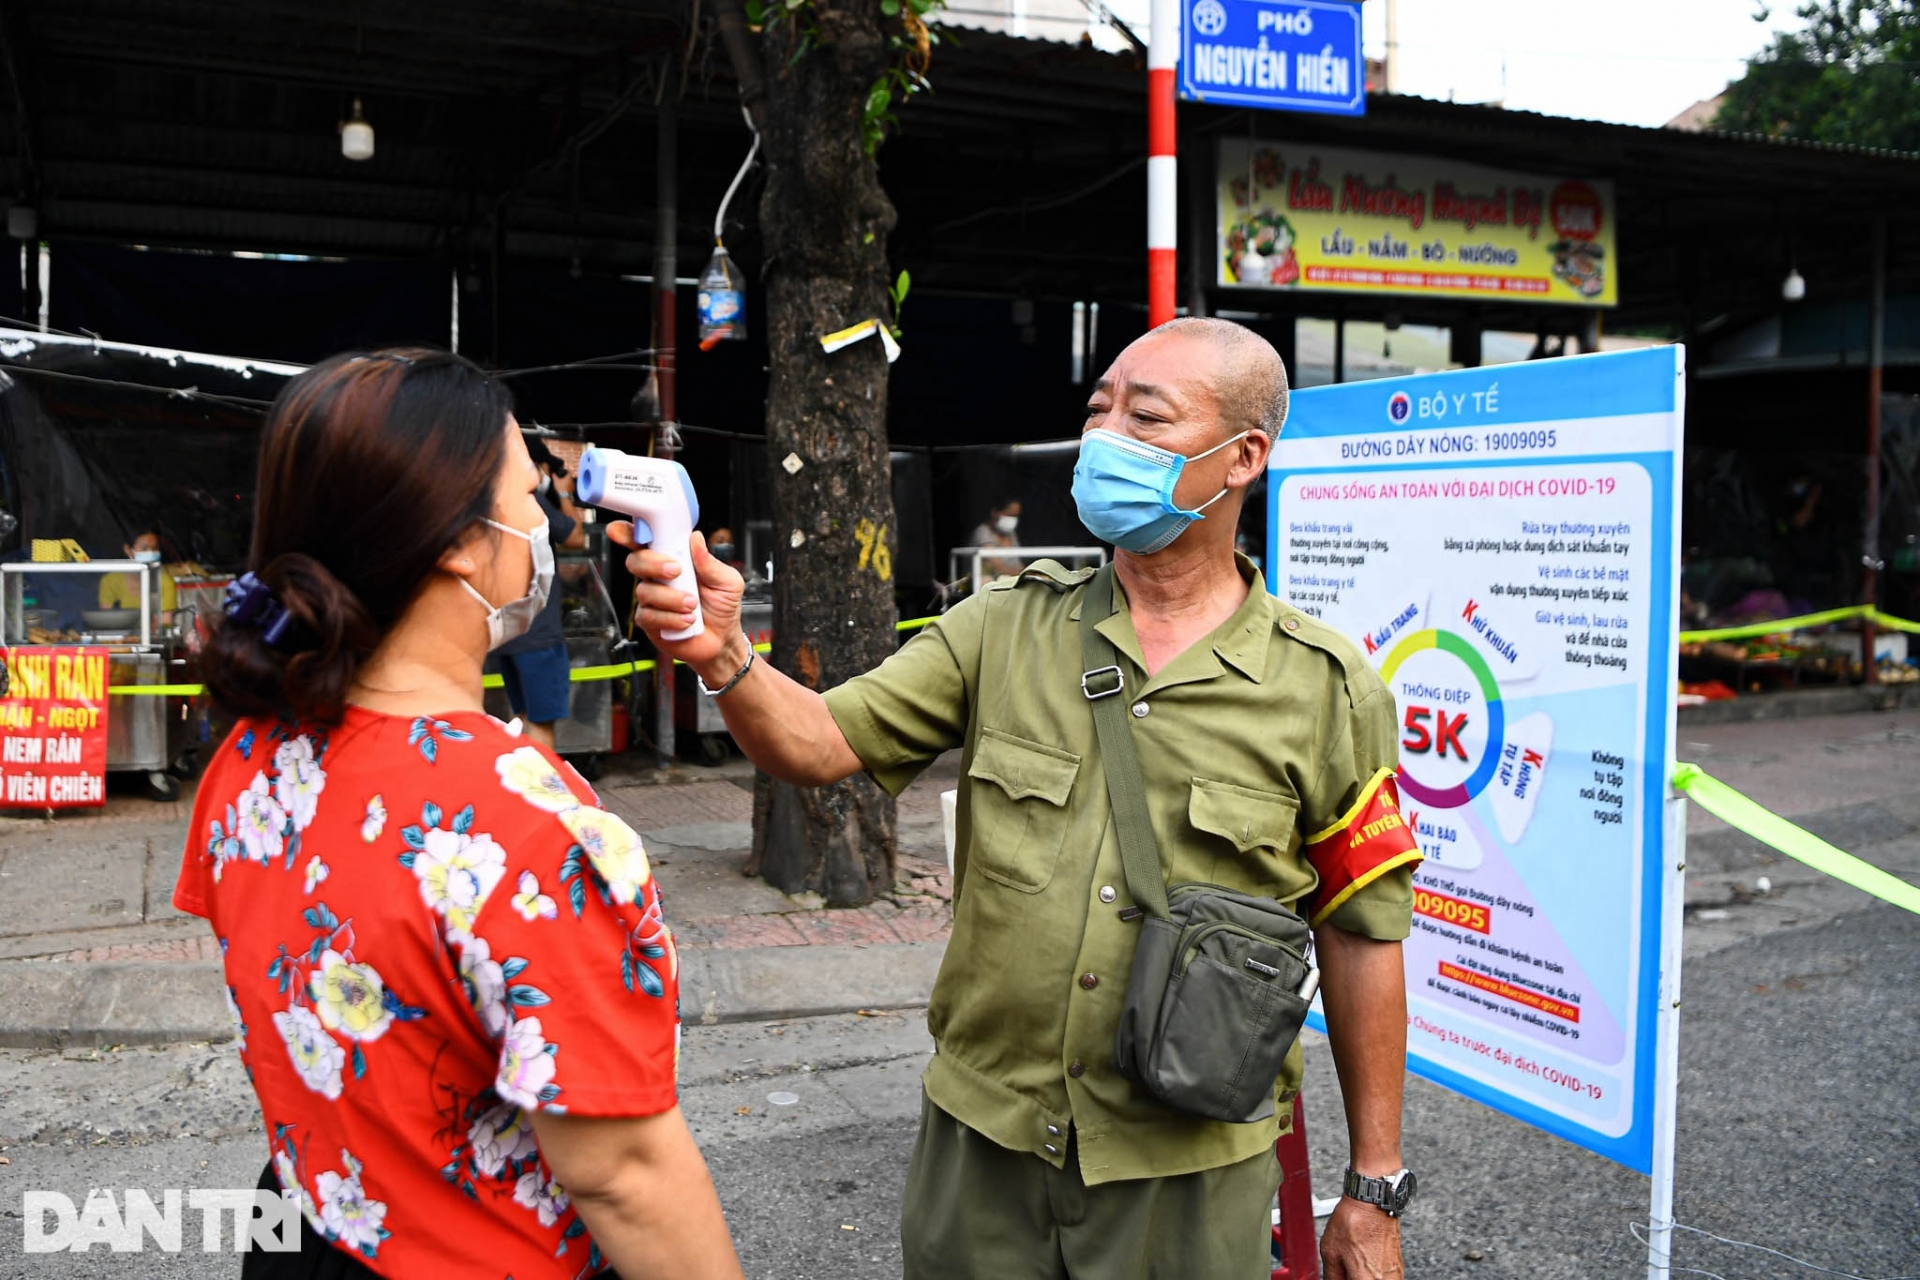 Hanoi Markets Use Creative Ideas to Protect People During Pandemic